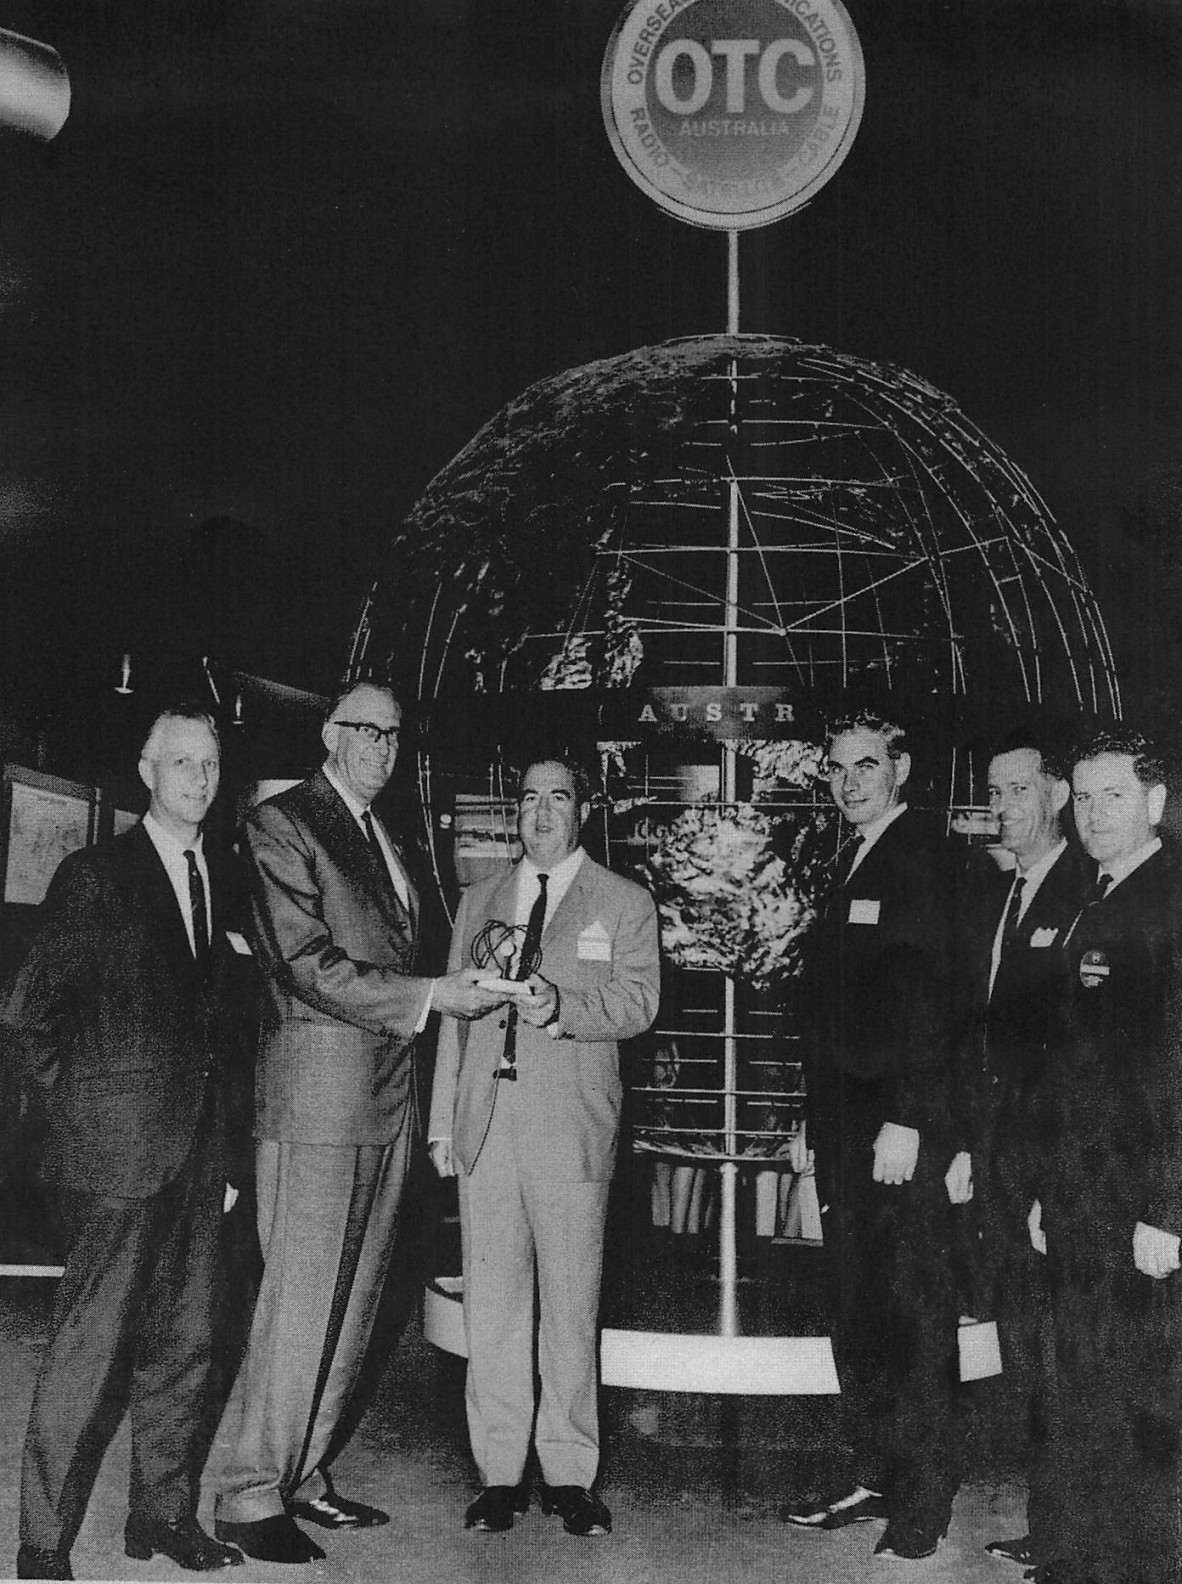 Sir Arthur Petfield and Mr Ray Harris hold an award presented by OTC by the Queensland Chamber of Manufactures for OTCs exhibit at the 1967 Queensland Industries Fair